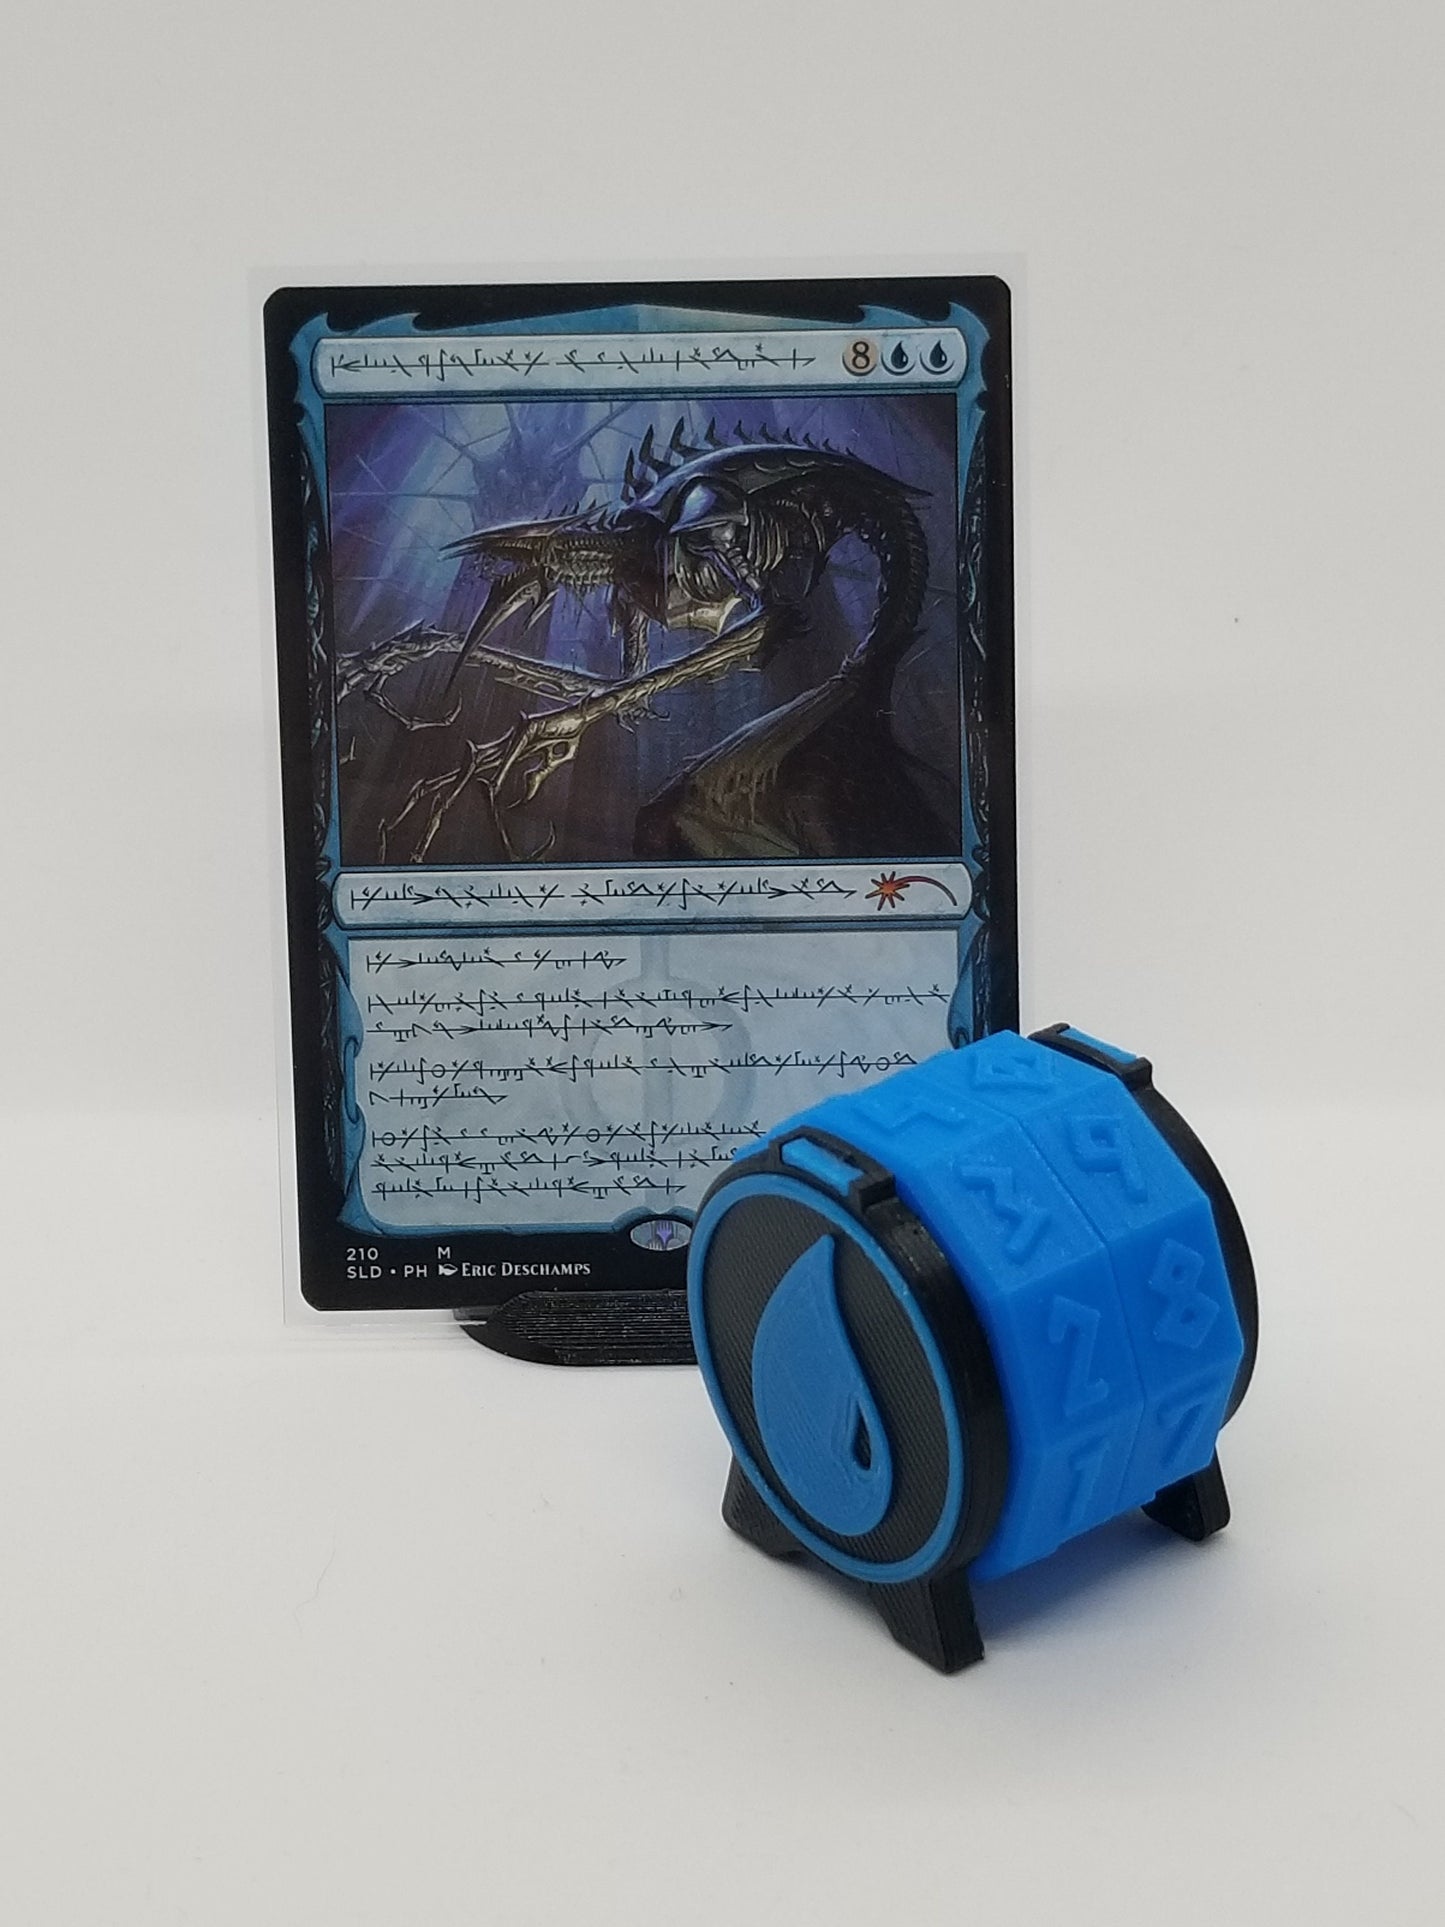 MTG Spindown Life Counters - Mana colors - Anthology - Ratcheting mechanism - Snoo3d